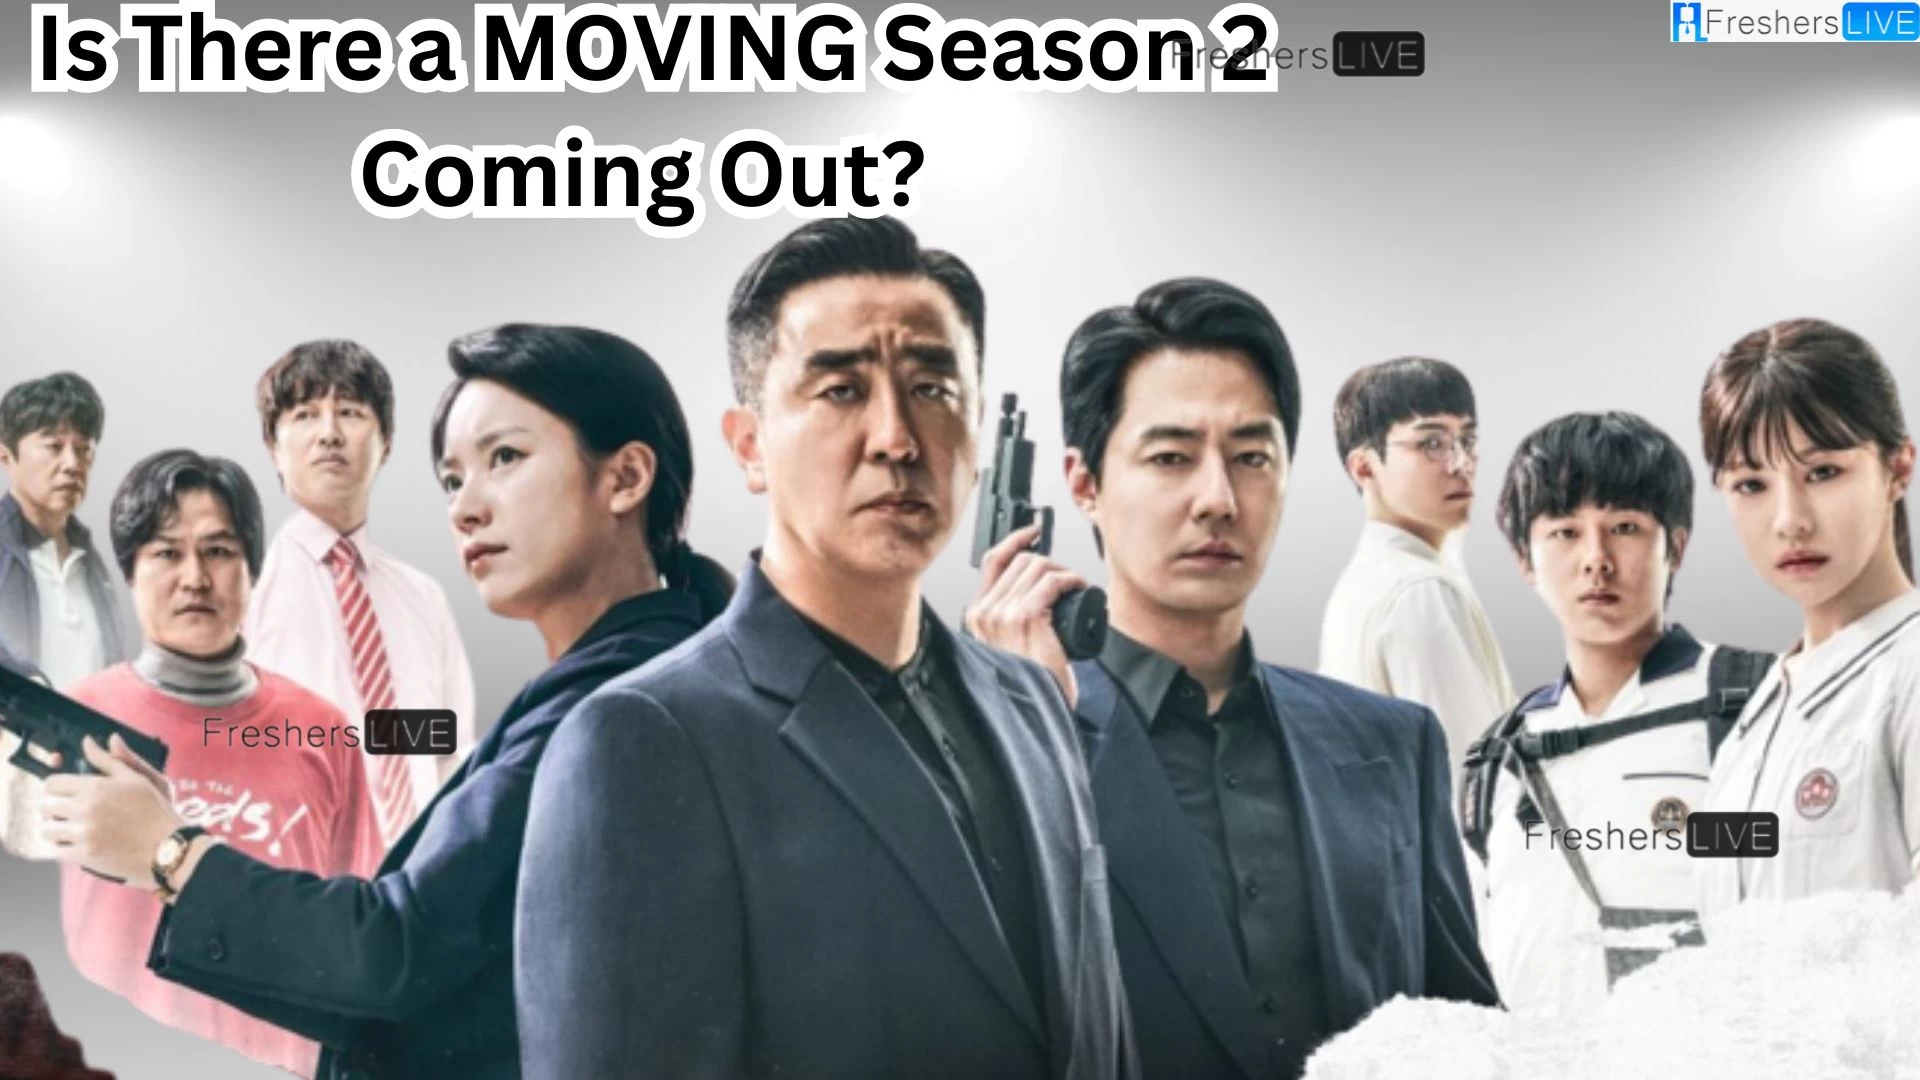 Is There a Moving Season 2 Coming Out? Will There Be a Moving Season 2? What Will Moving Season 2 Be About?